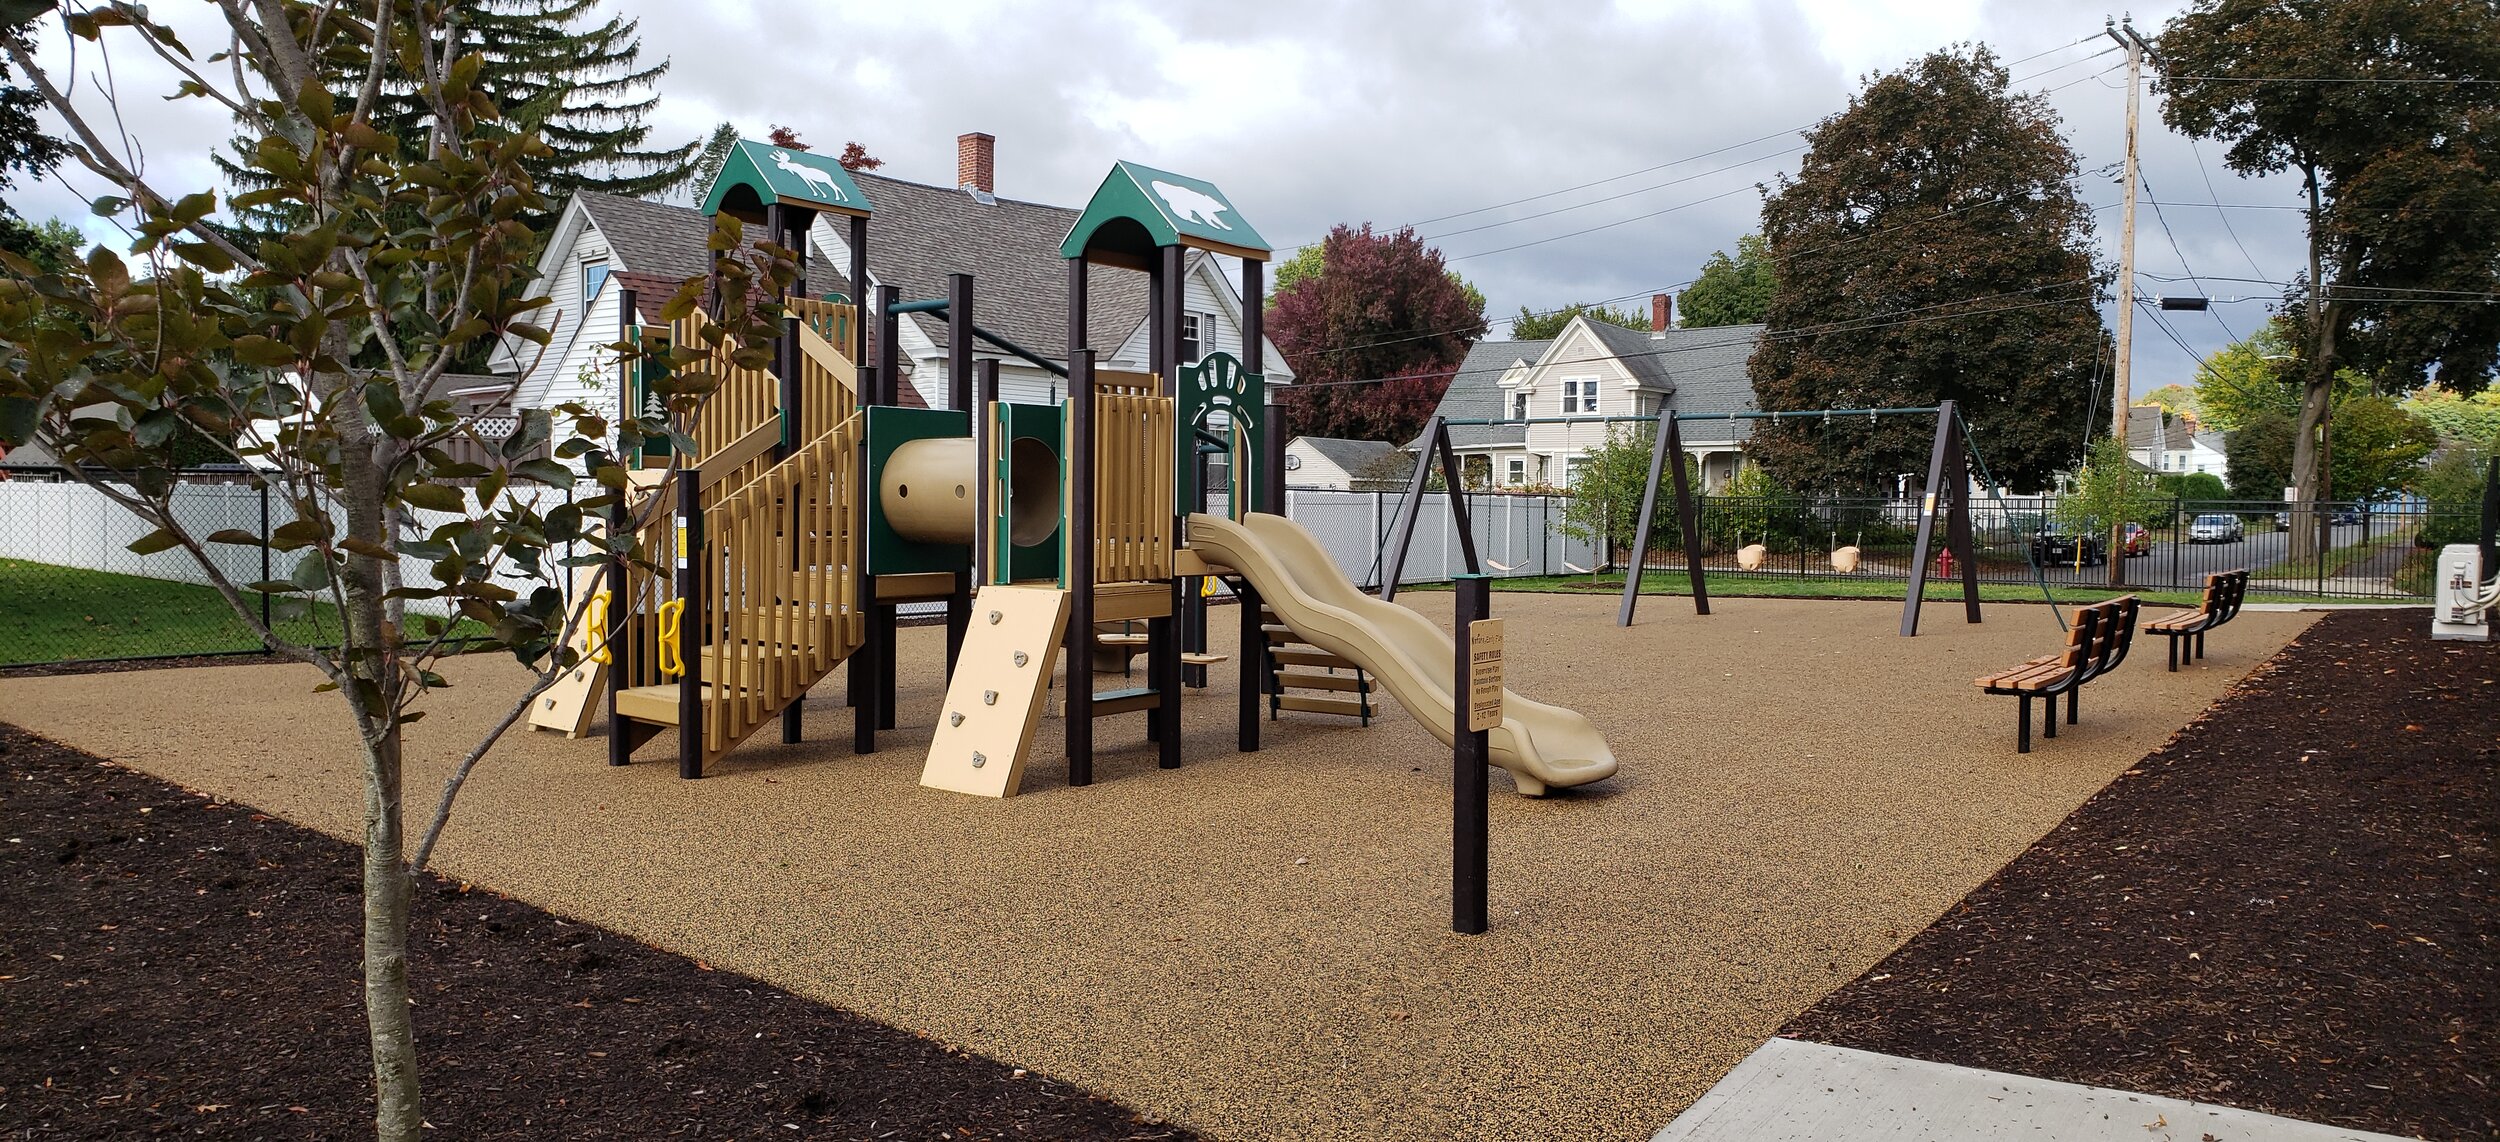 Mosely Street Apartments Playground 4.jpg